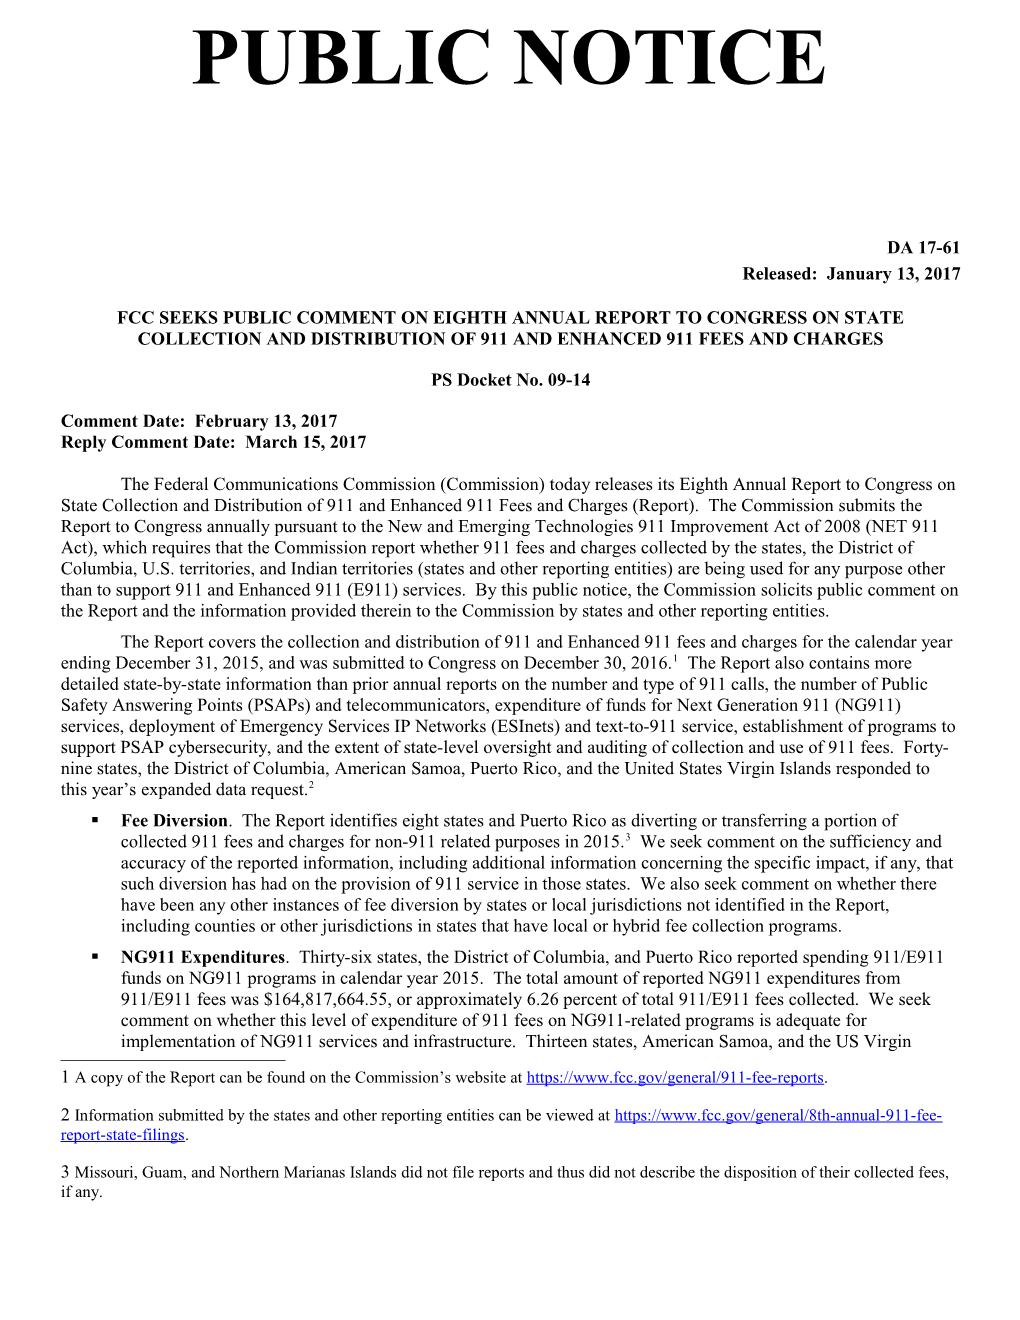 Fcc Seeks Public Comment on Eighth Annual Report to Congress on State Collection And